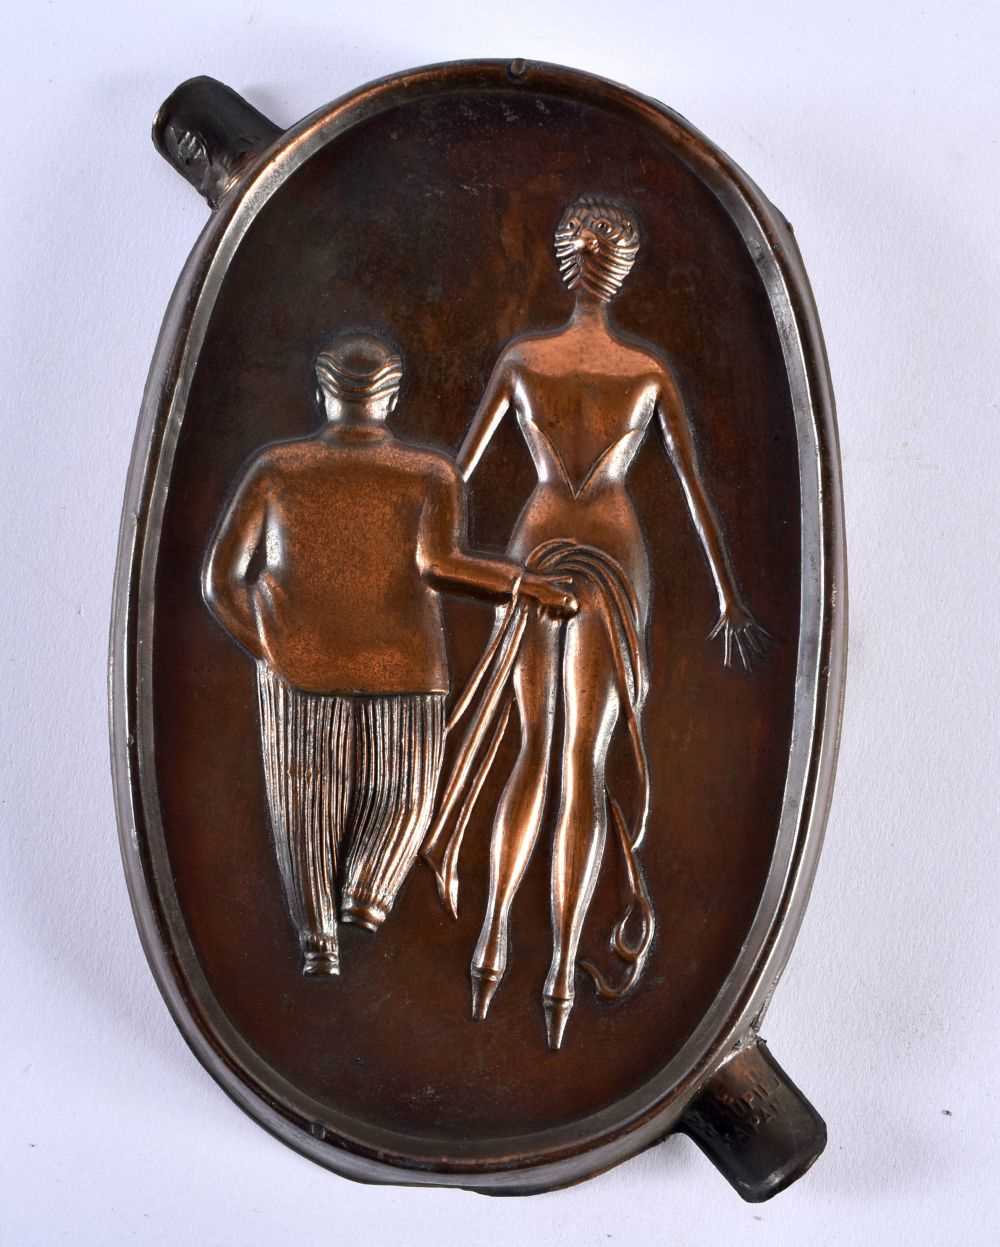 A CHARMING VINTAGE COPPER AND LEAD OH AH EROTIC ASHTRAY. 15 cm x 10 cm. - Image 6 of 6